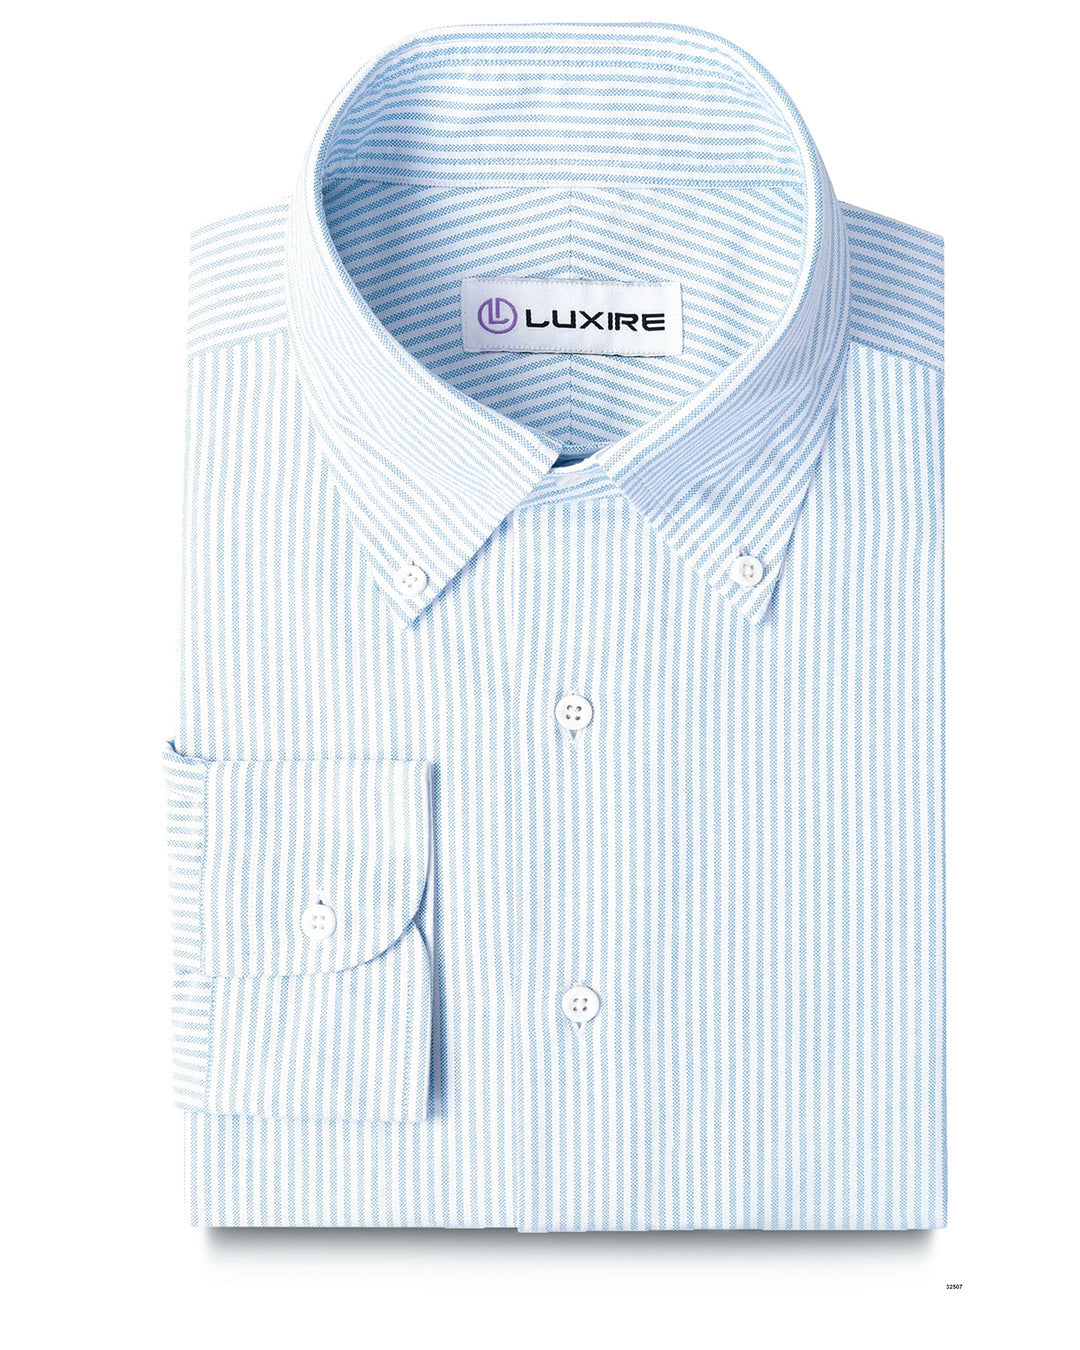 Front of the custom oxford shirt for men by Luxire in white with light blue stripes